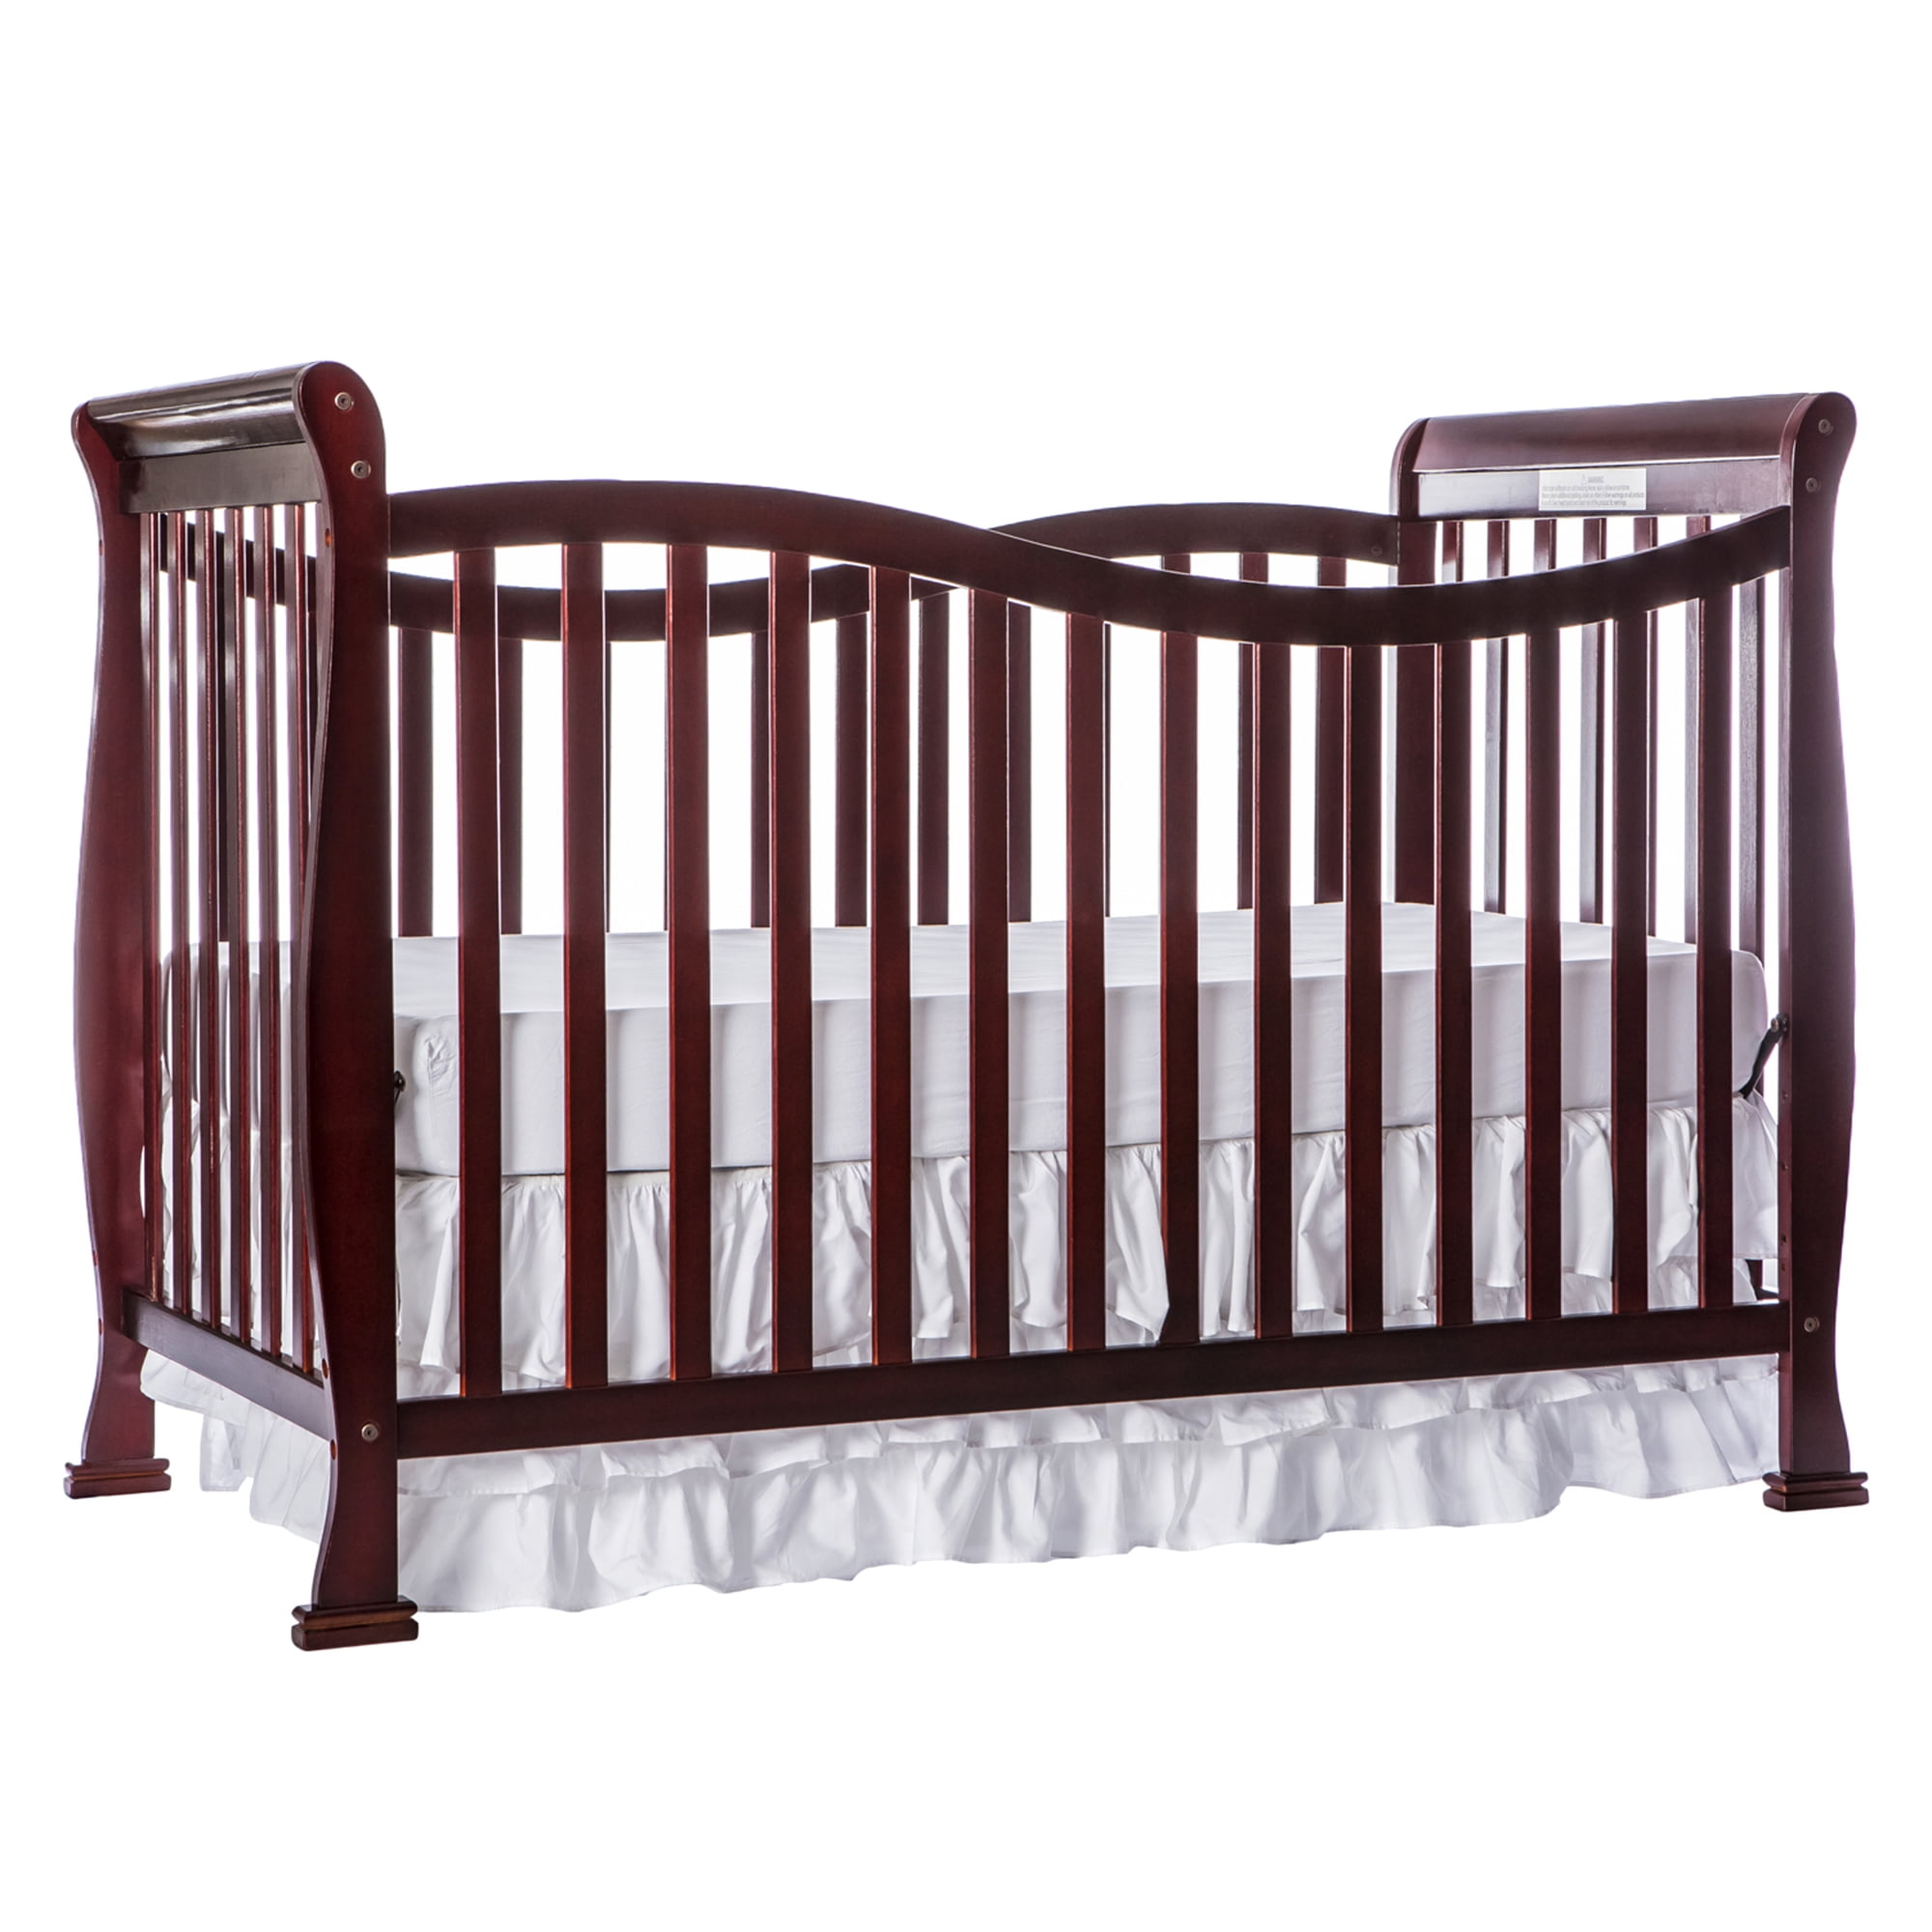 Black Dream On Me Violet 7 in 1 Convertible Life Style Crib 